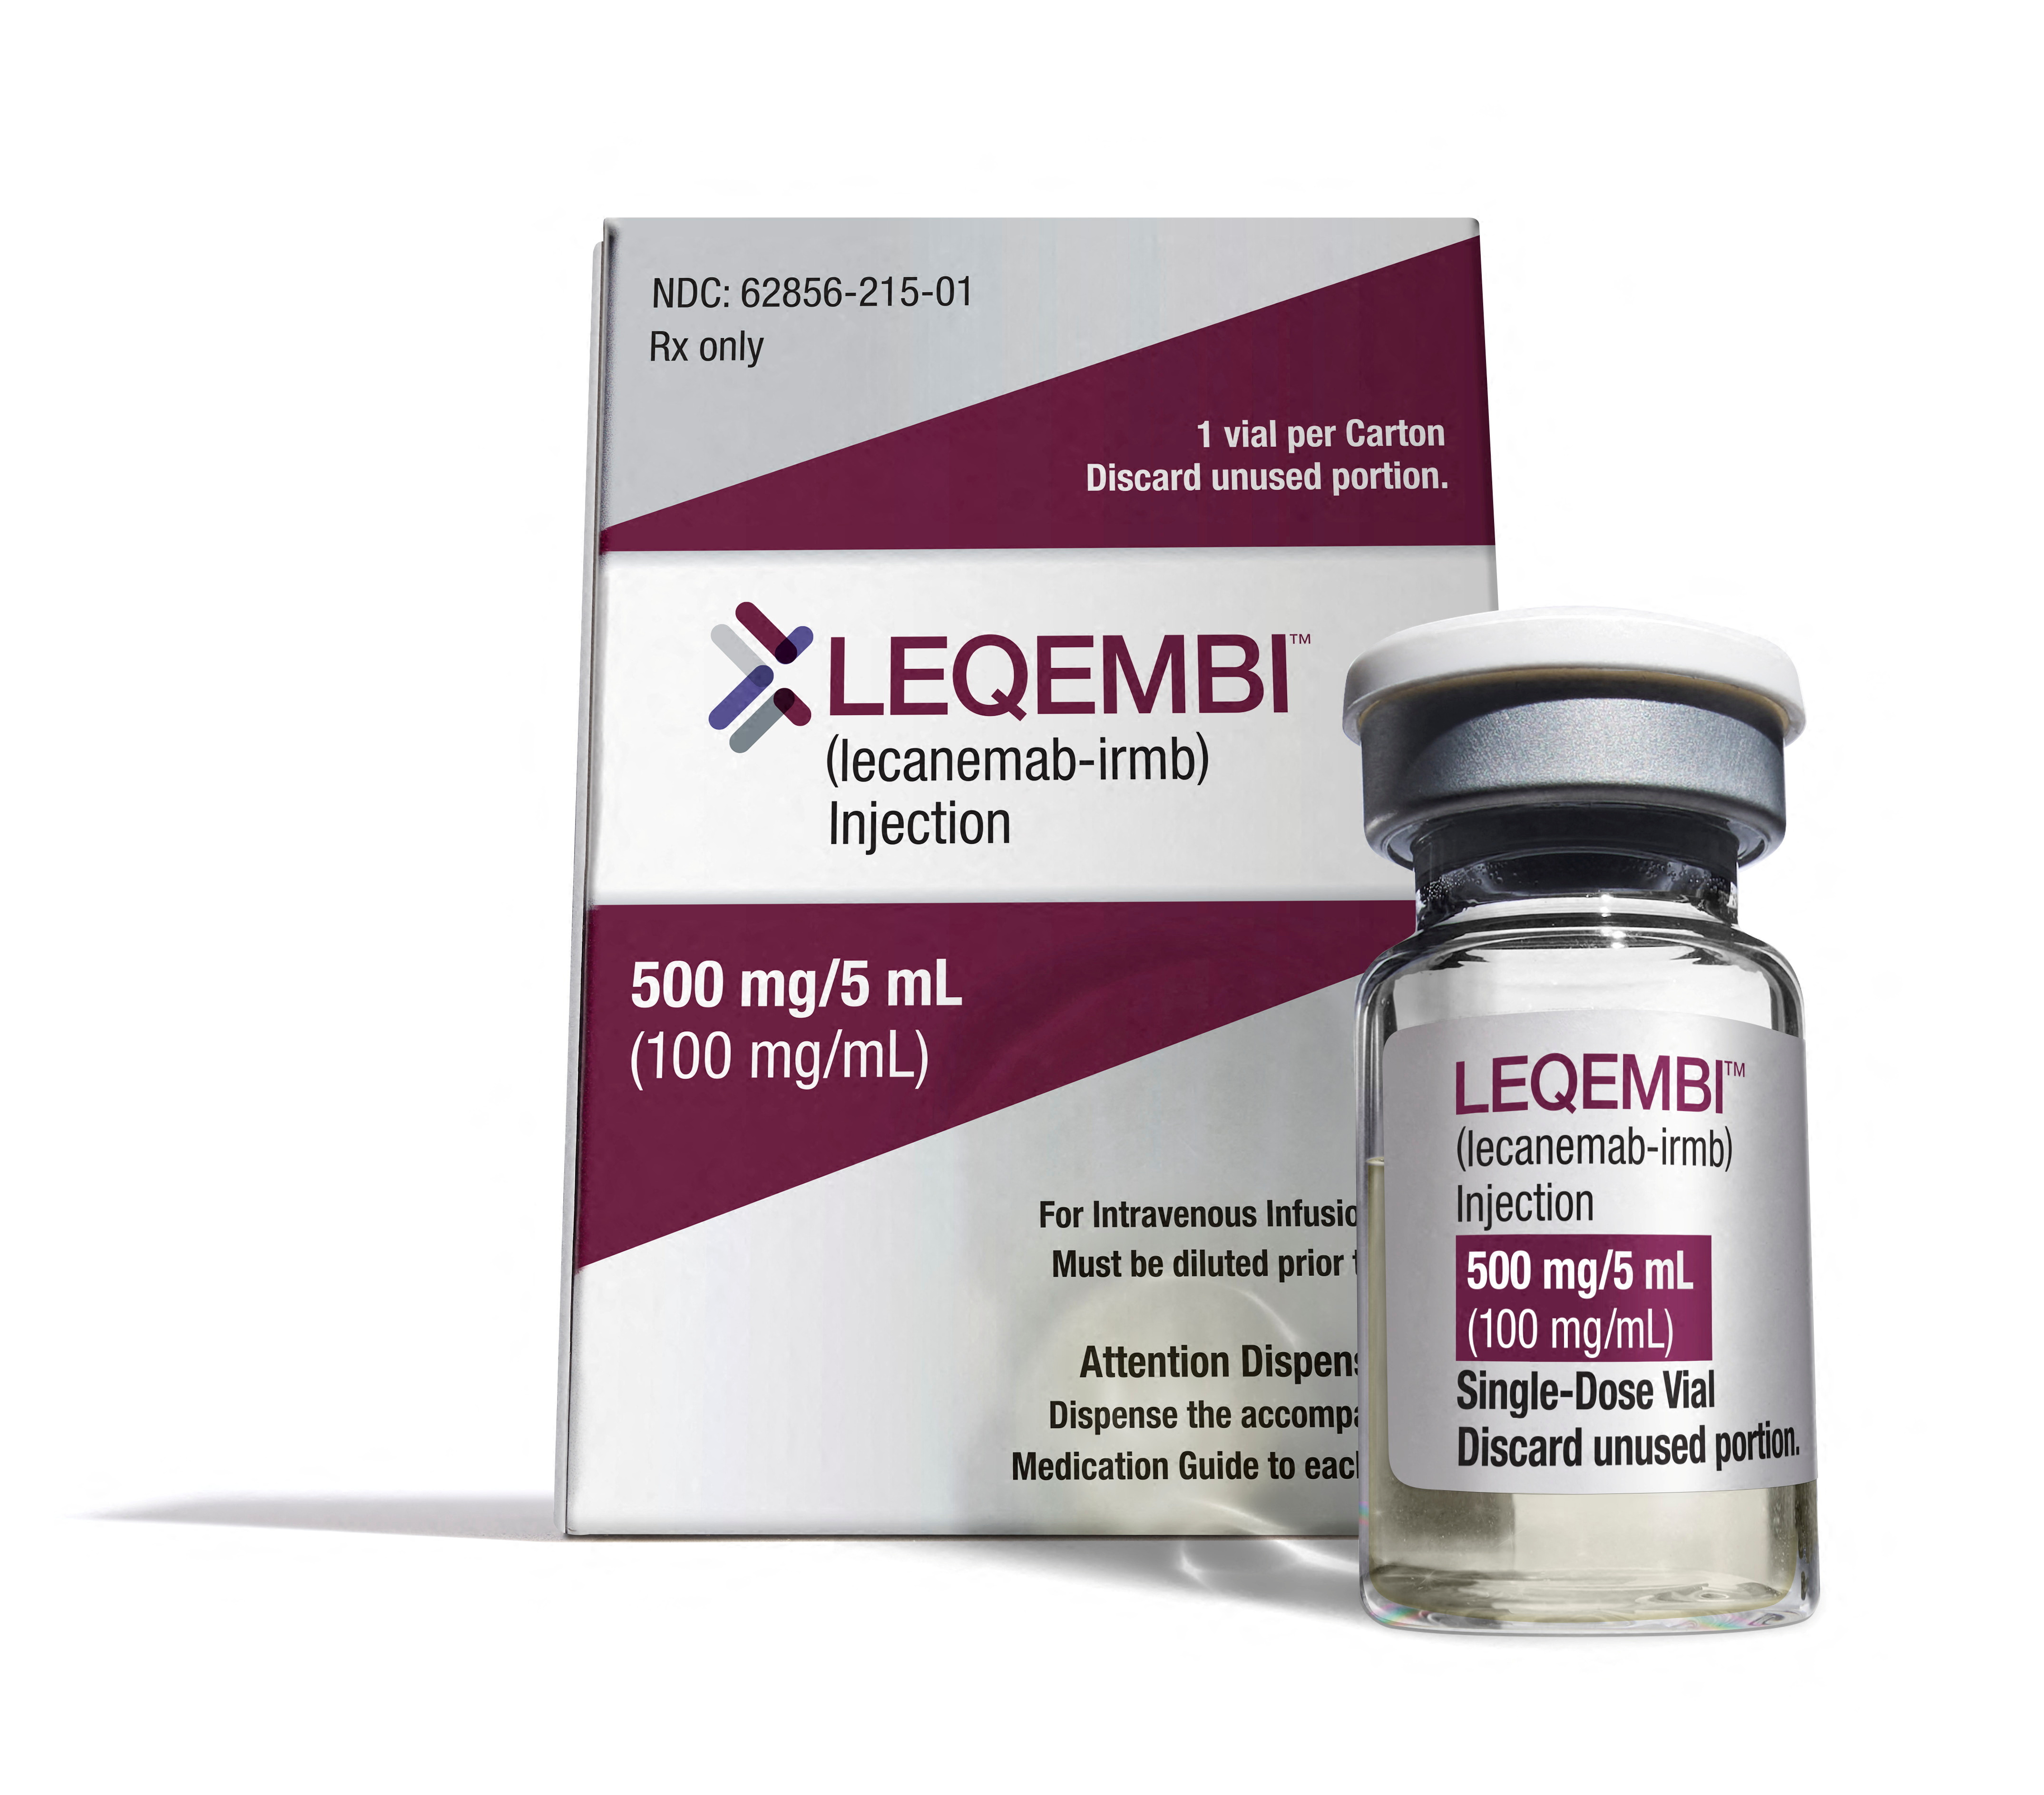 Two drugs - Aducanumab and Leqembi - were recently approved for the treatment of Alzheimer's in the U.S. /Eisai/Reuters